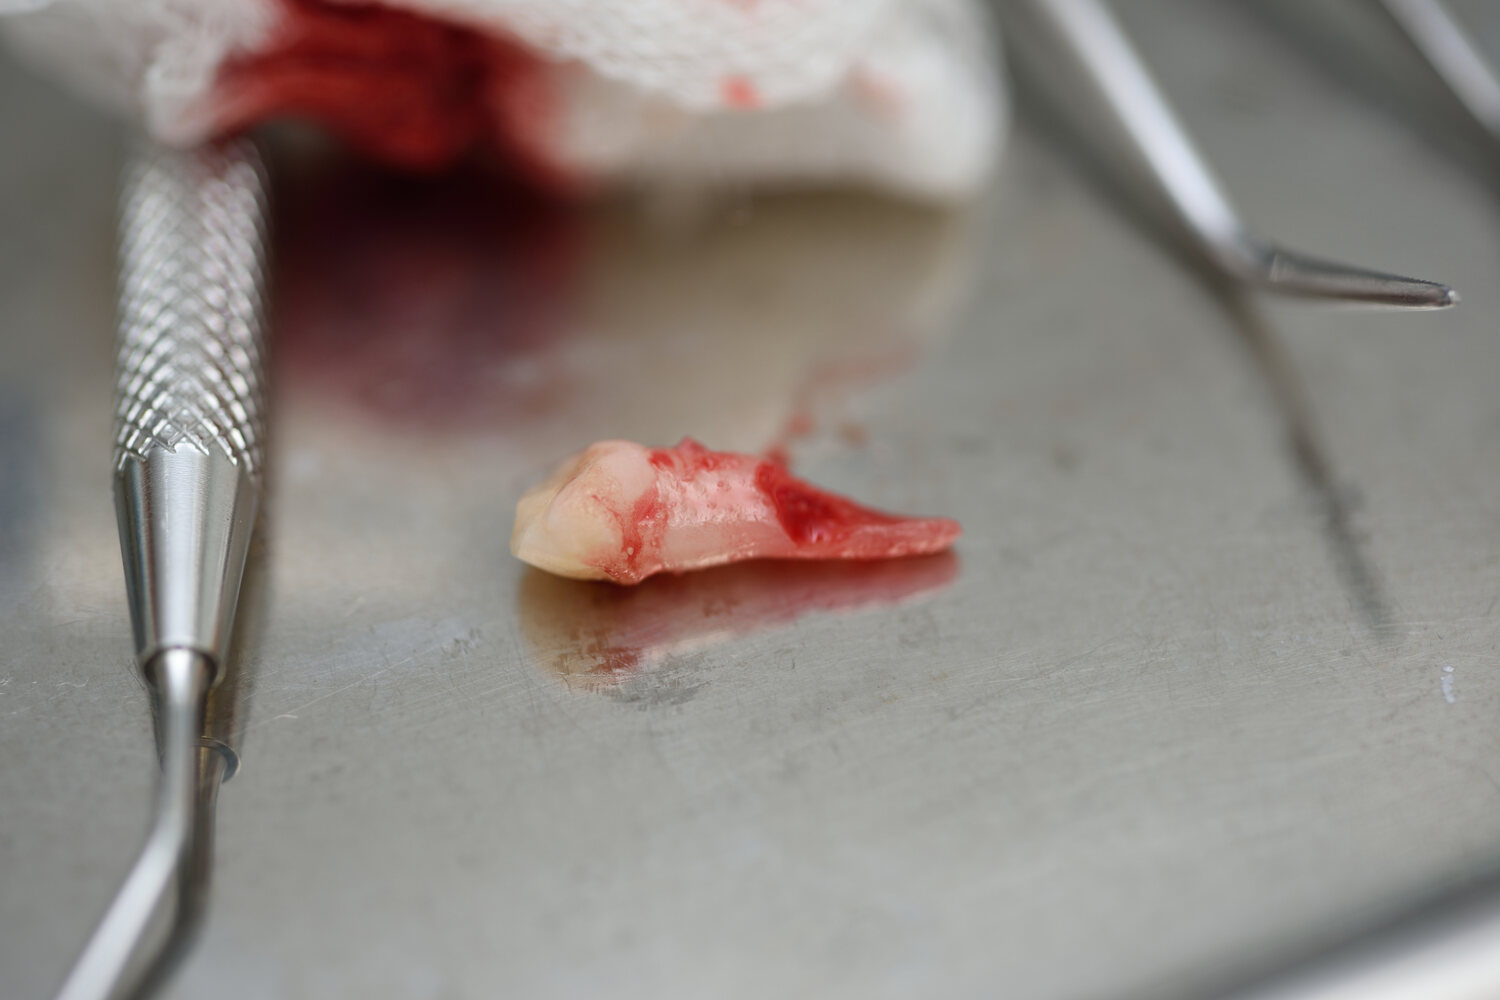 Knocked-Out Tooth or Tooth Avulsion